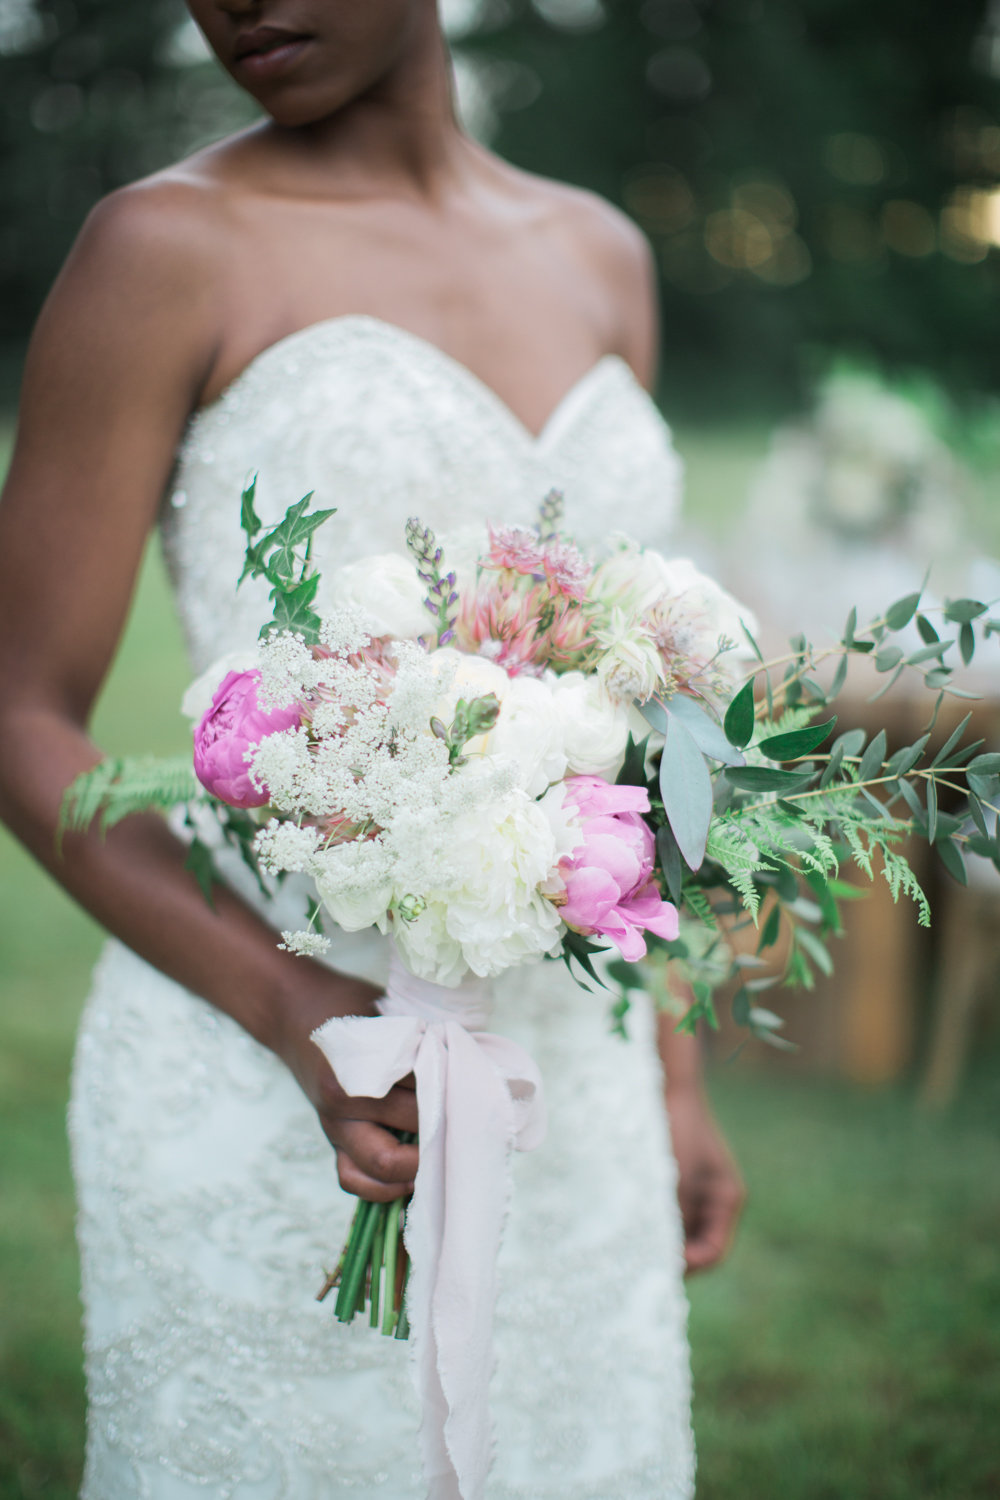 View More: http://madisonabbeyphotography.pass.us/the-rustic-life